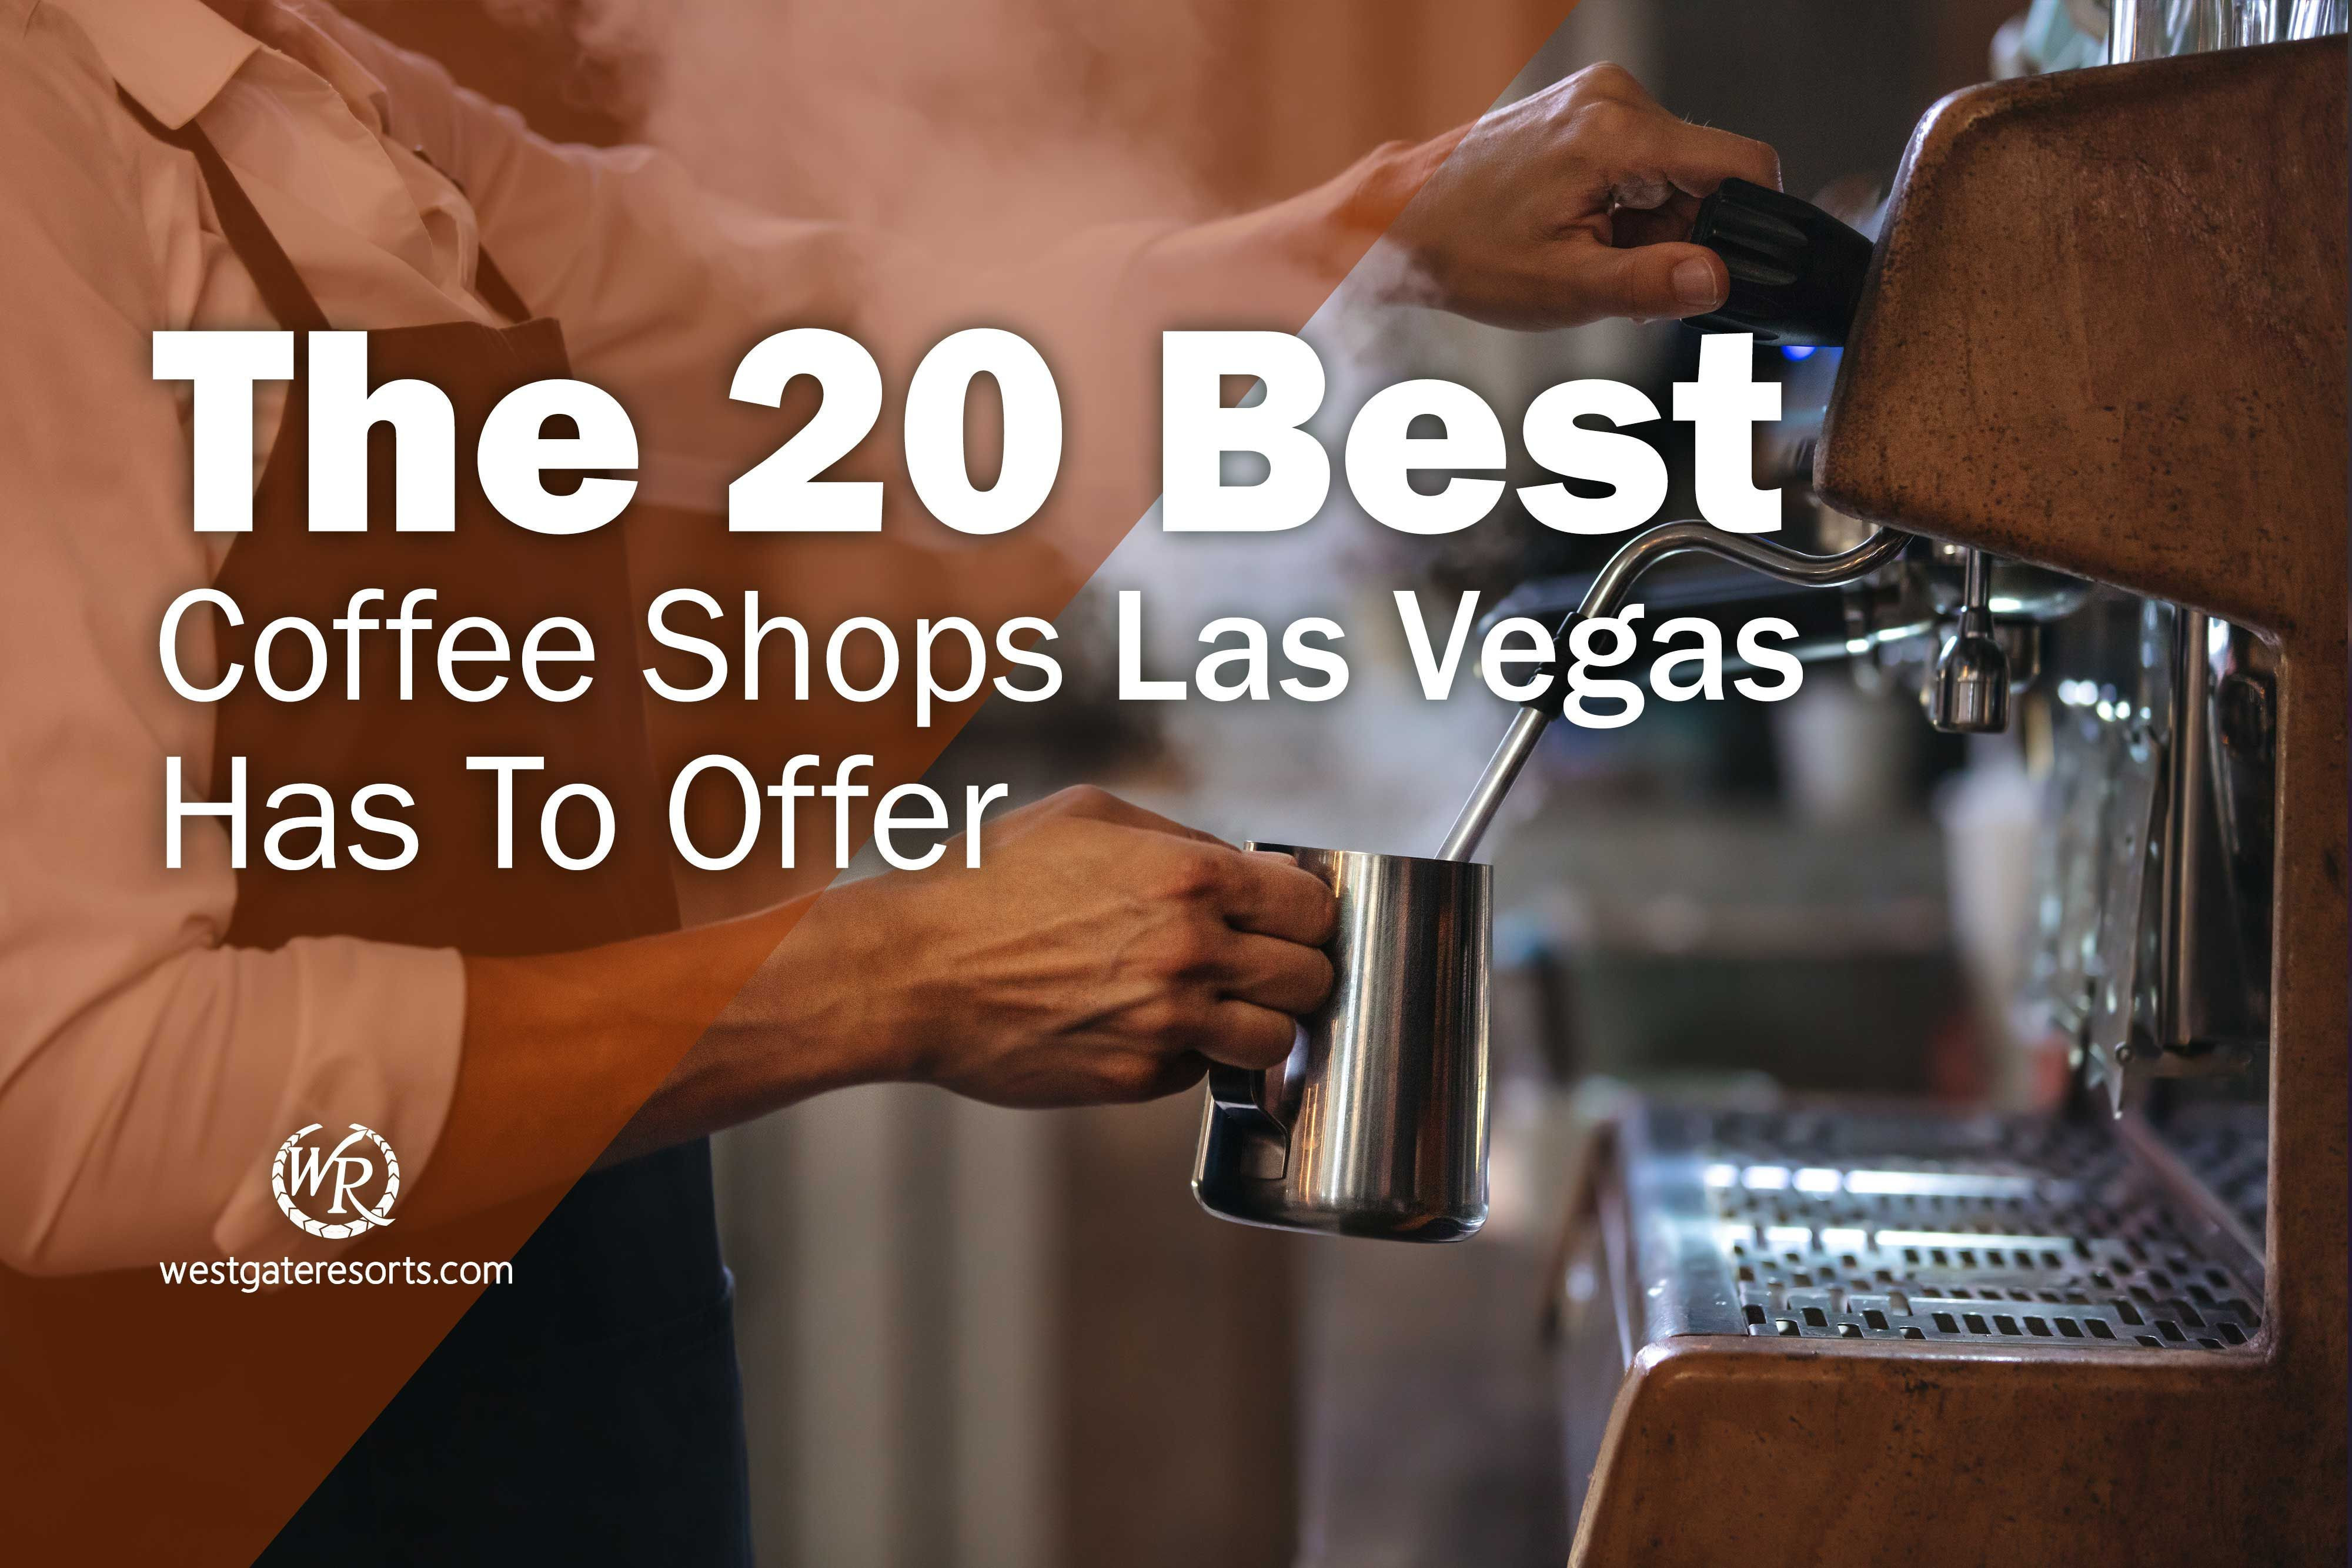 The 20 Best Coffee Shops Las Vegas Has To Offer